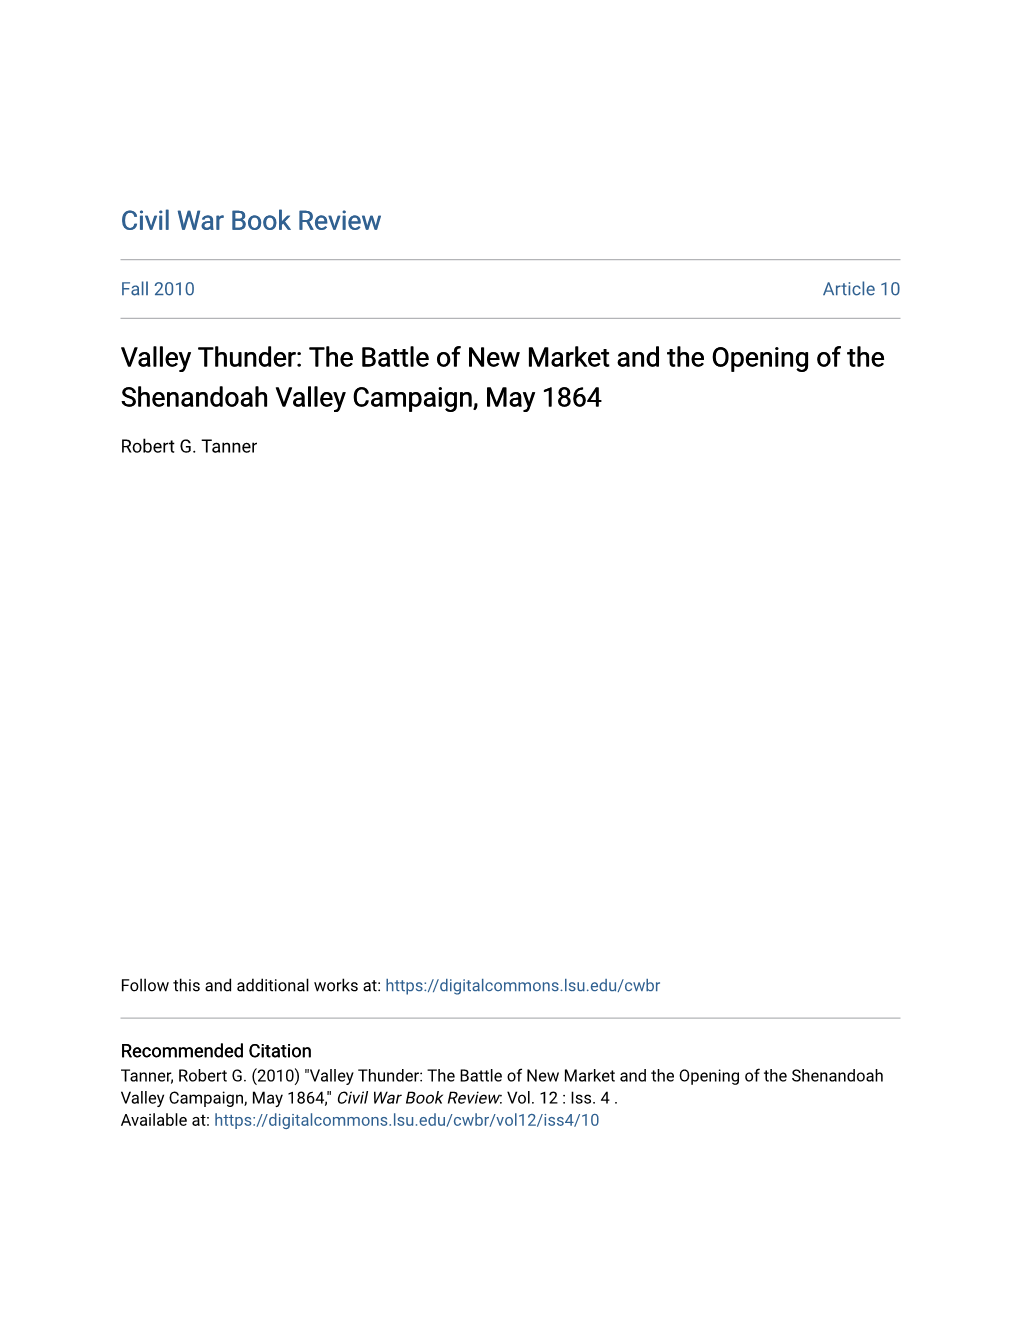 Valley Thunder: the Battle of New Market and the Opening of the Shenandoah Valley Campaign, May 1864